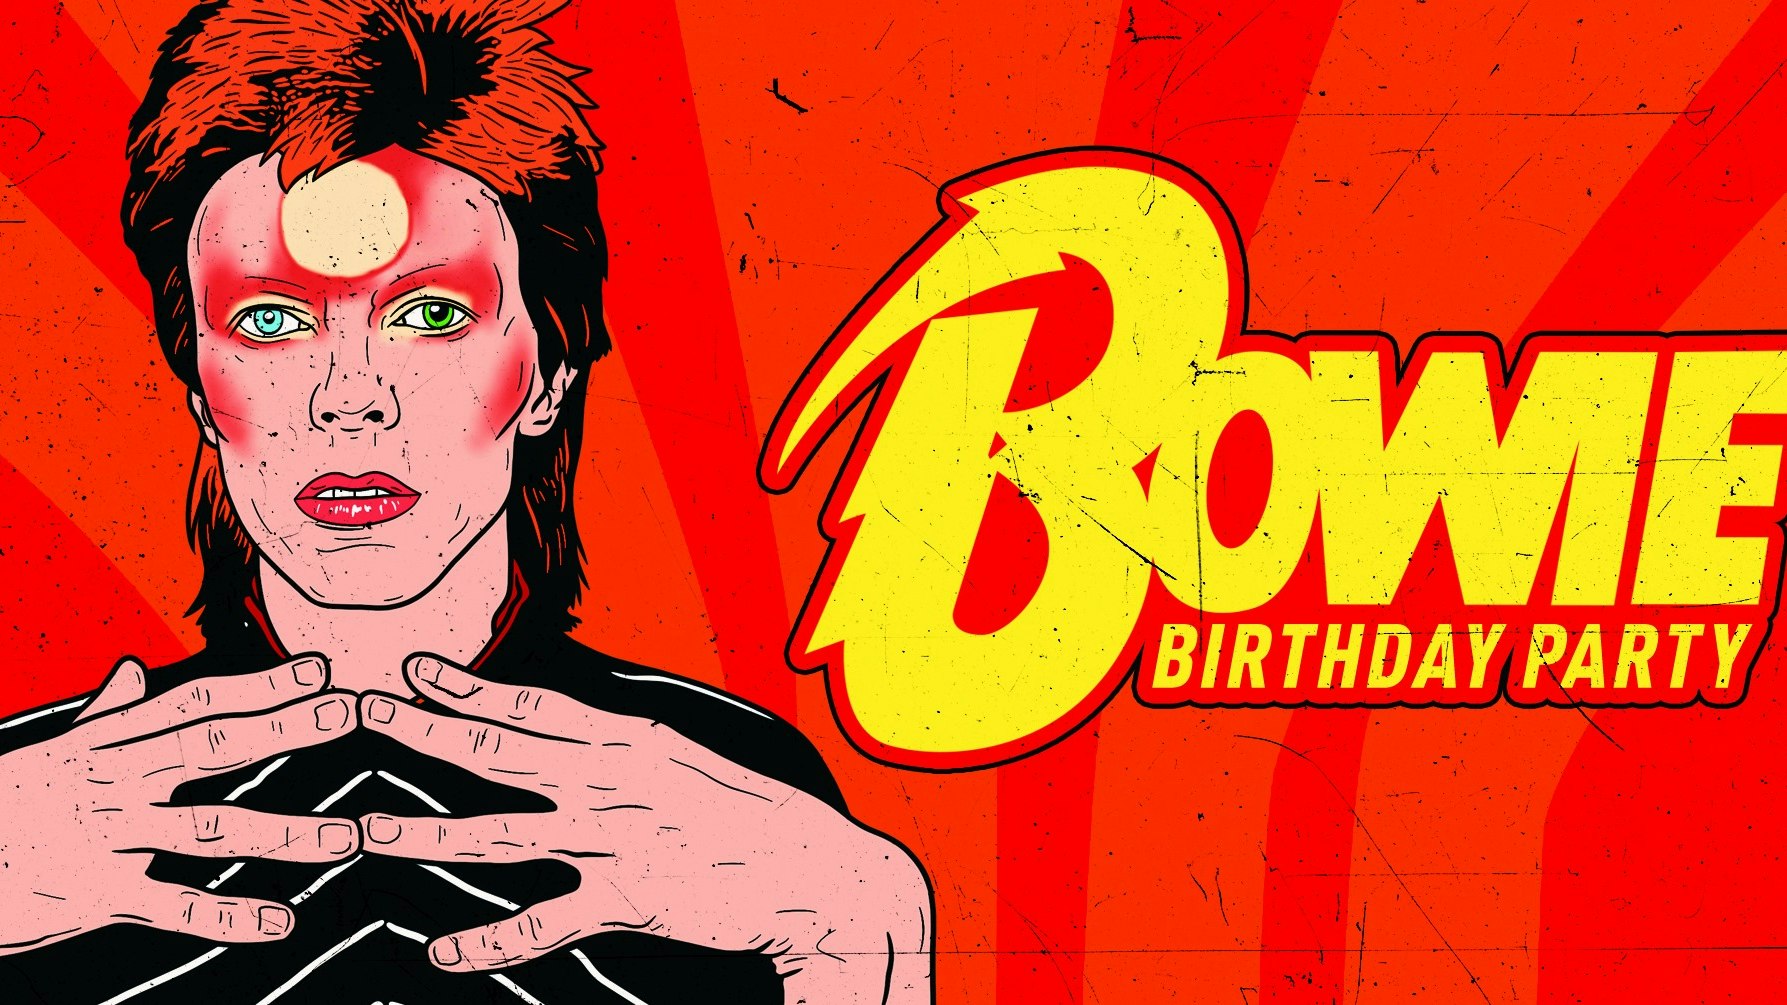 David Bowie’s Birthday Party – Manchester